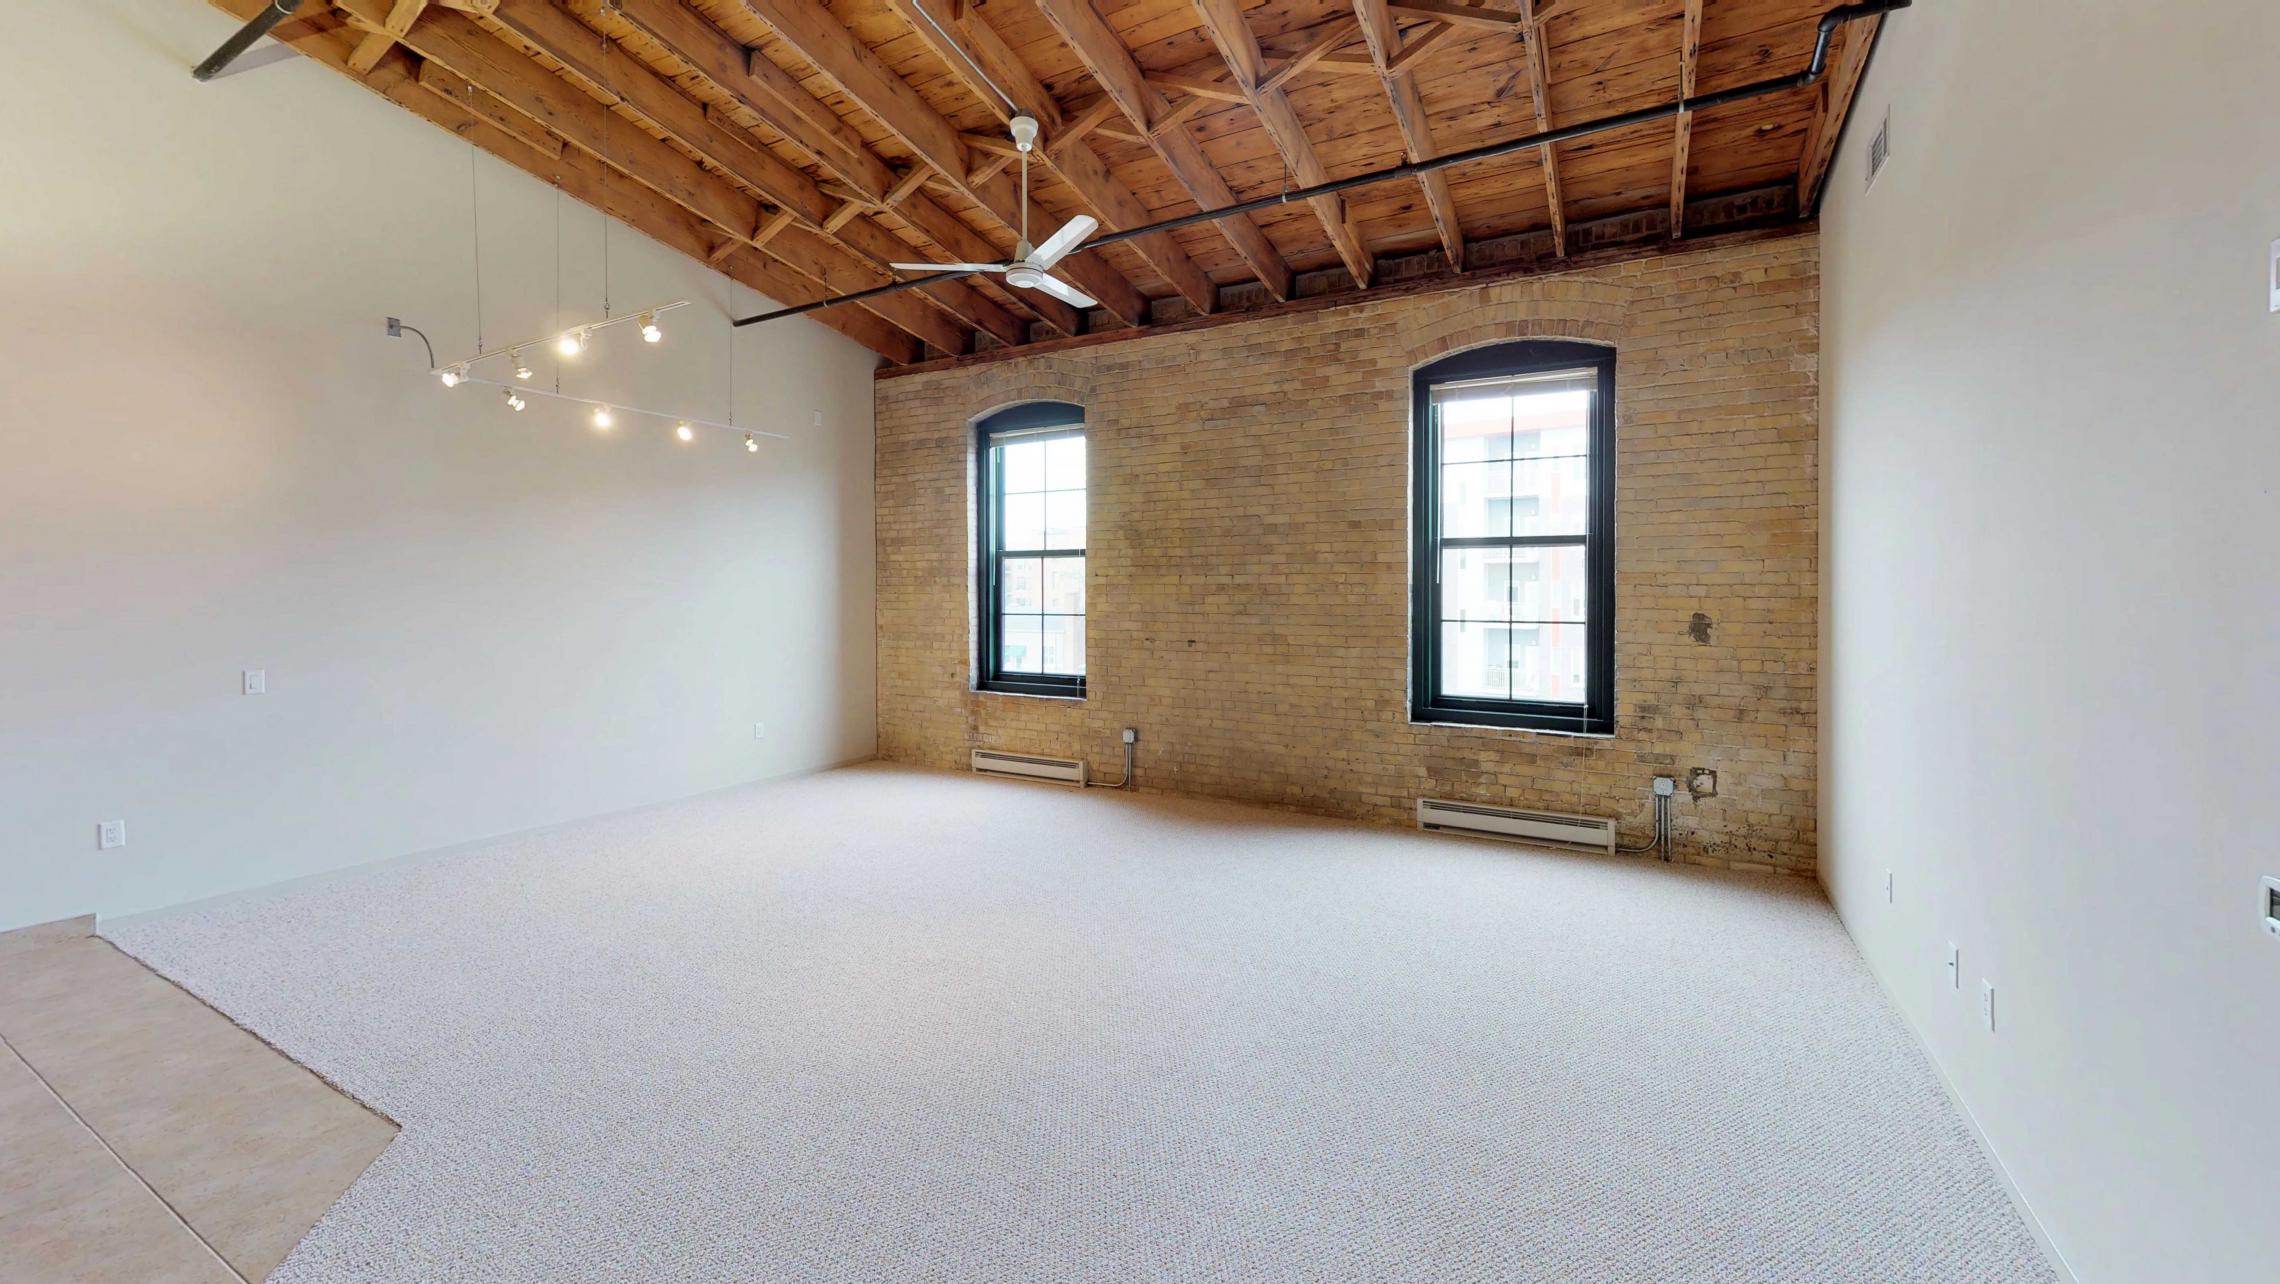 Tobacco-Lofts-E311-Apartment-Downtown-Madison-Design-Exposures-Brick-Beams-Vaulted-Ceiling-Yards.jpg